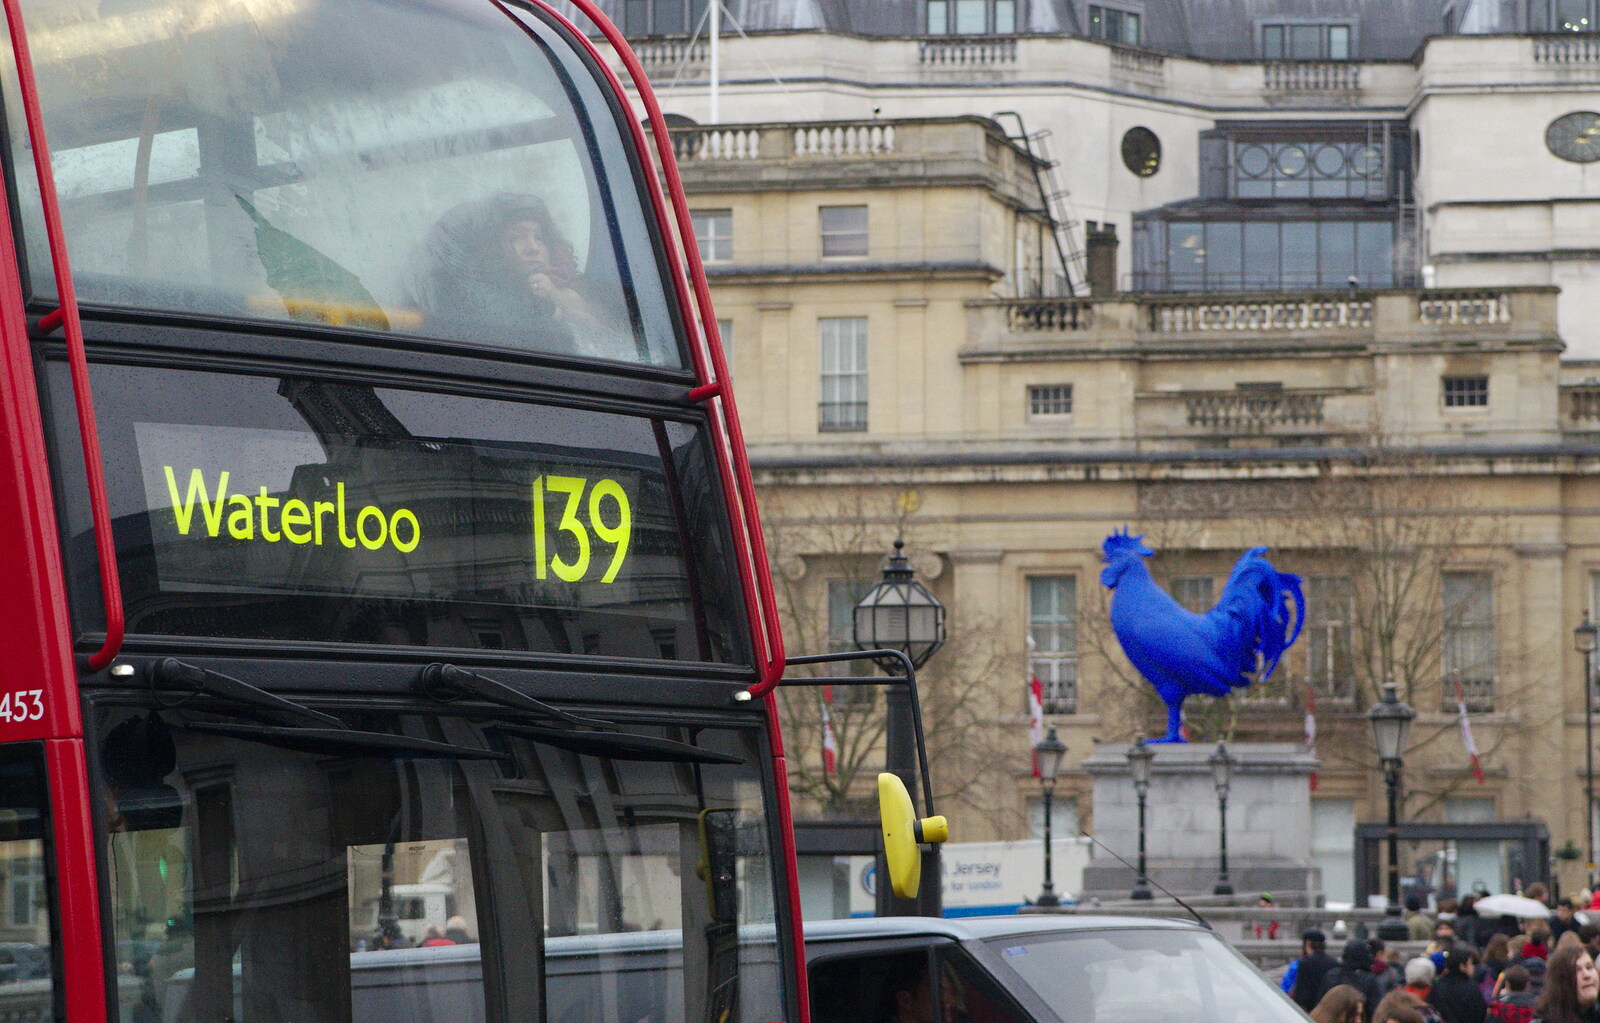 Someone peers out from the top deck of a bus from SwiftKey Innovation, The Hub, Westminster, London - 21st February 2014